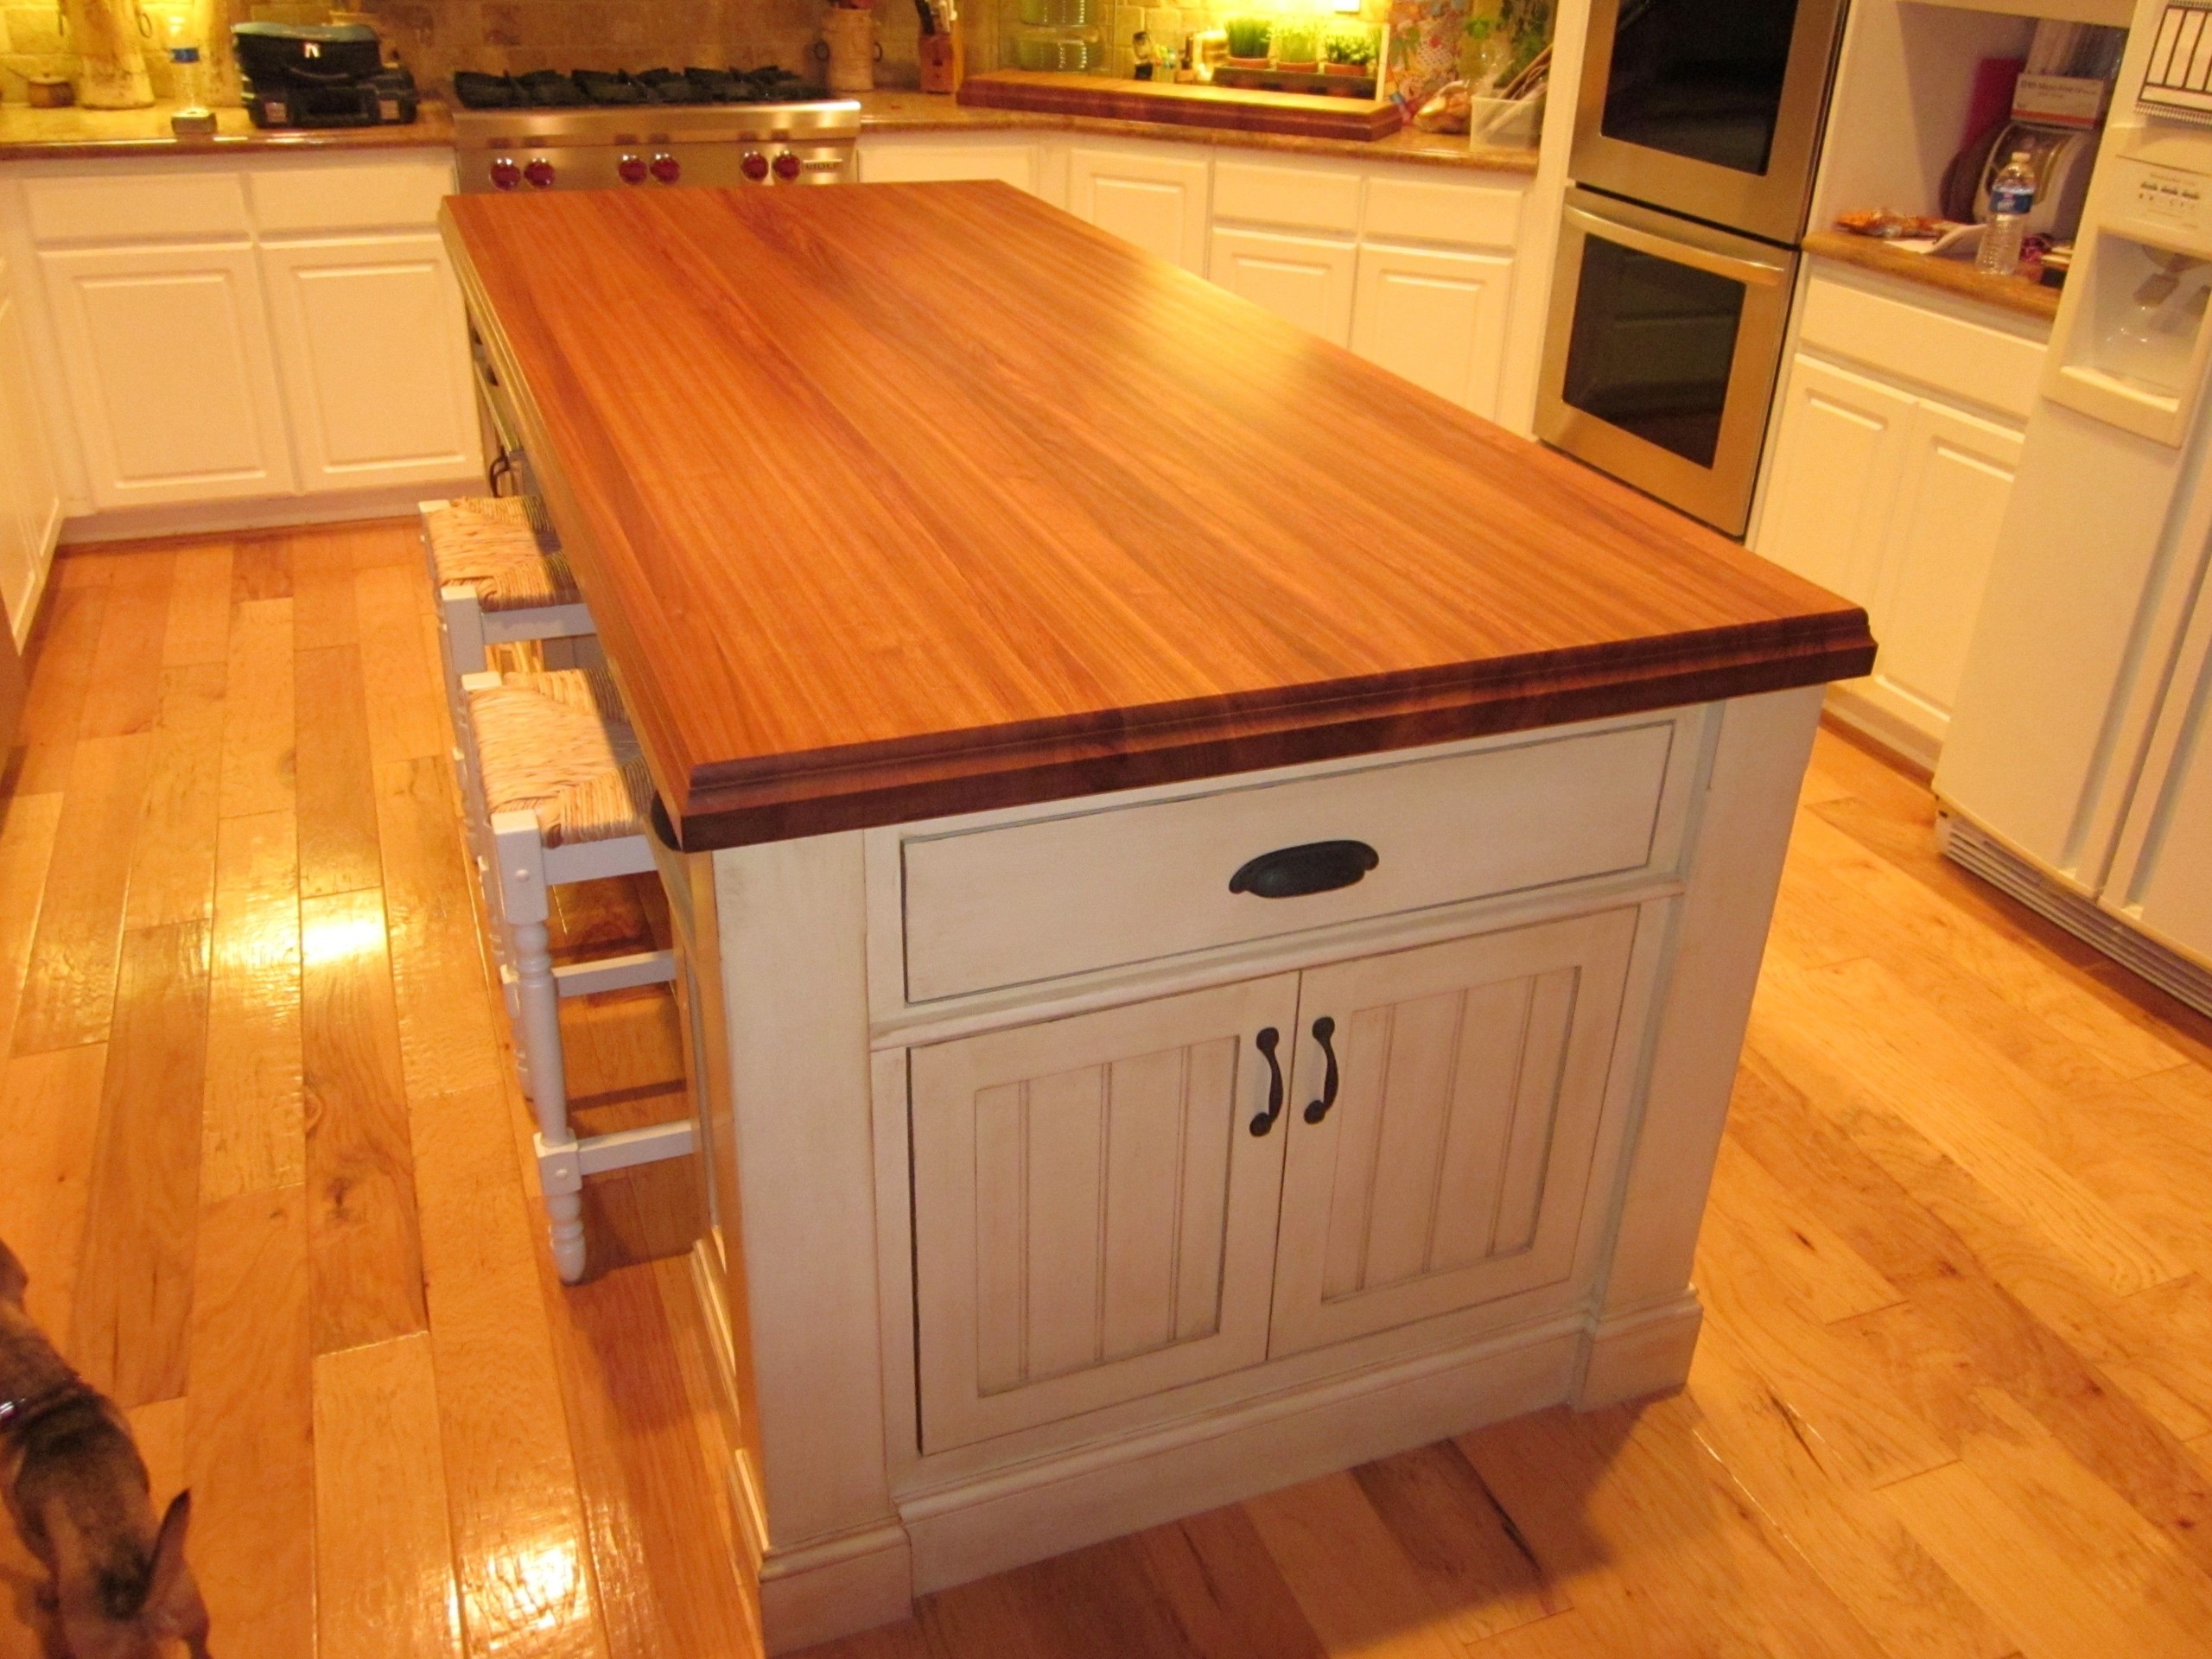 Kitchen amazing butcher block island with simplistic design for small